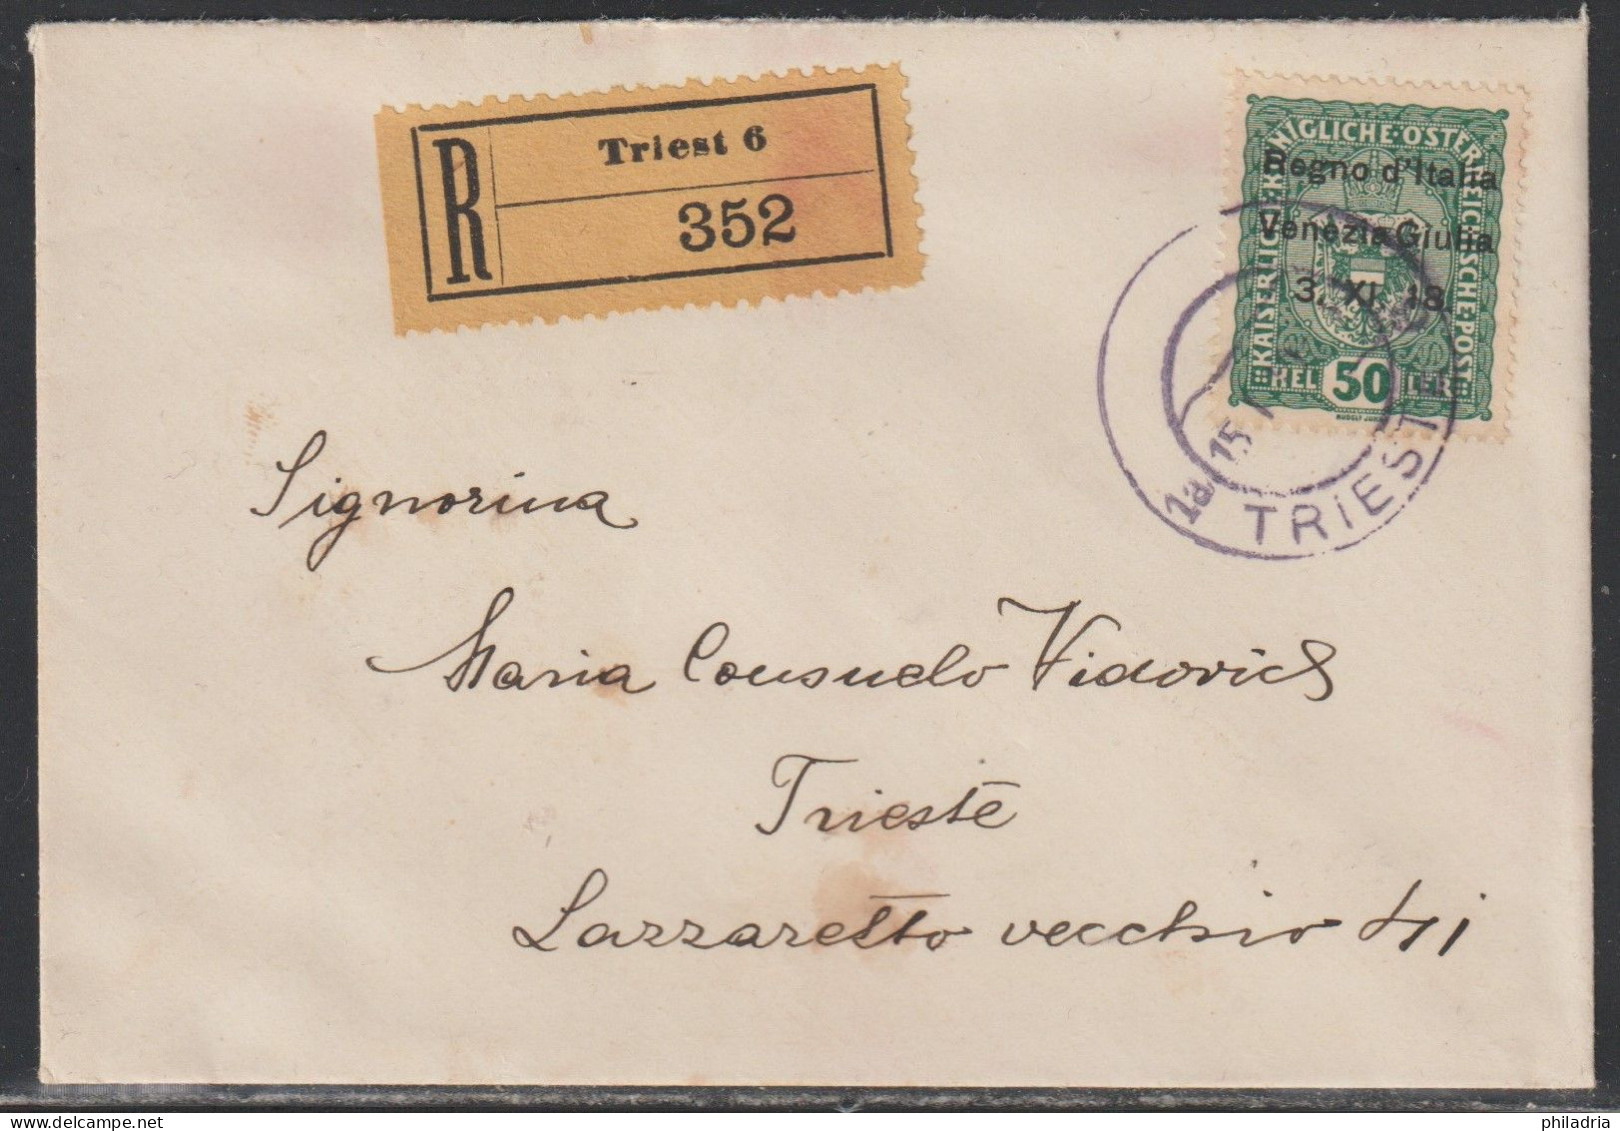 Triest 6, 1919, Registered Cover Franked With 50 Cent. - Venezia Giulia